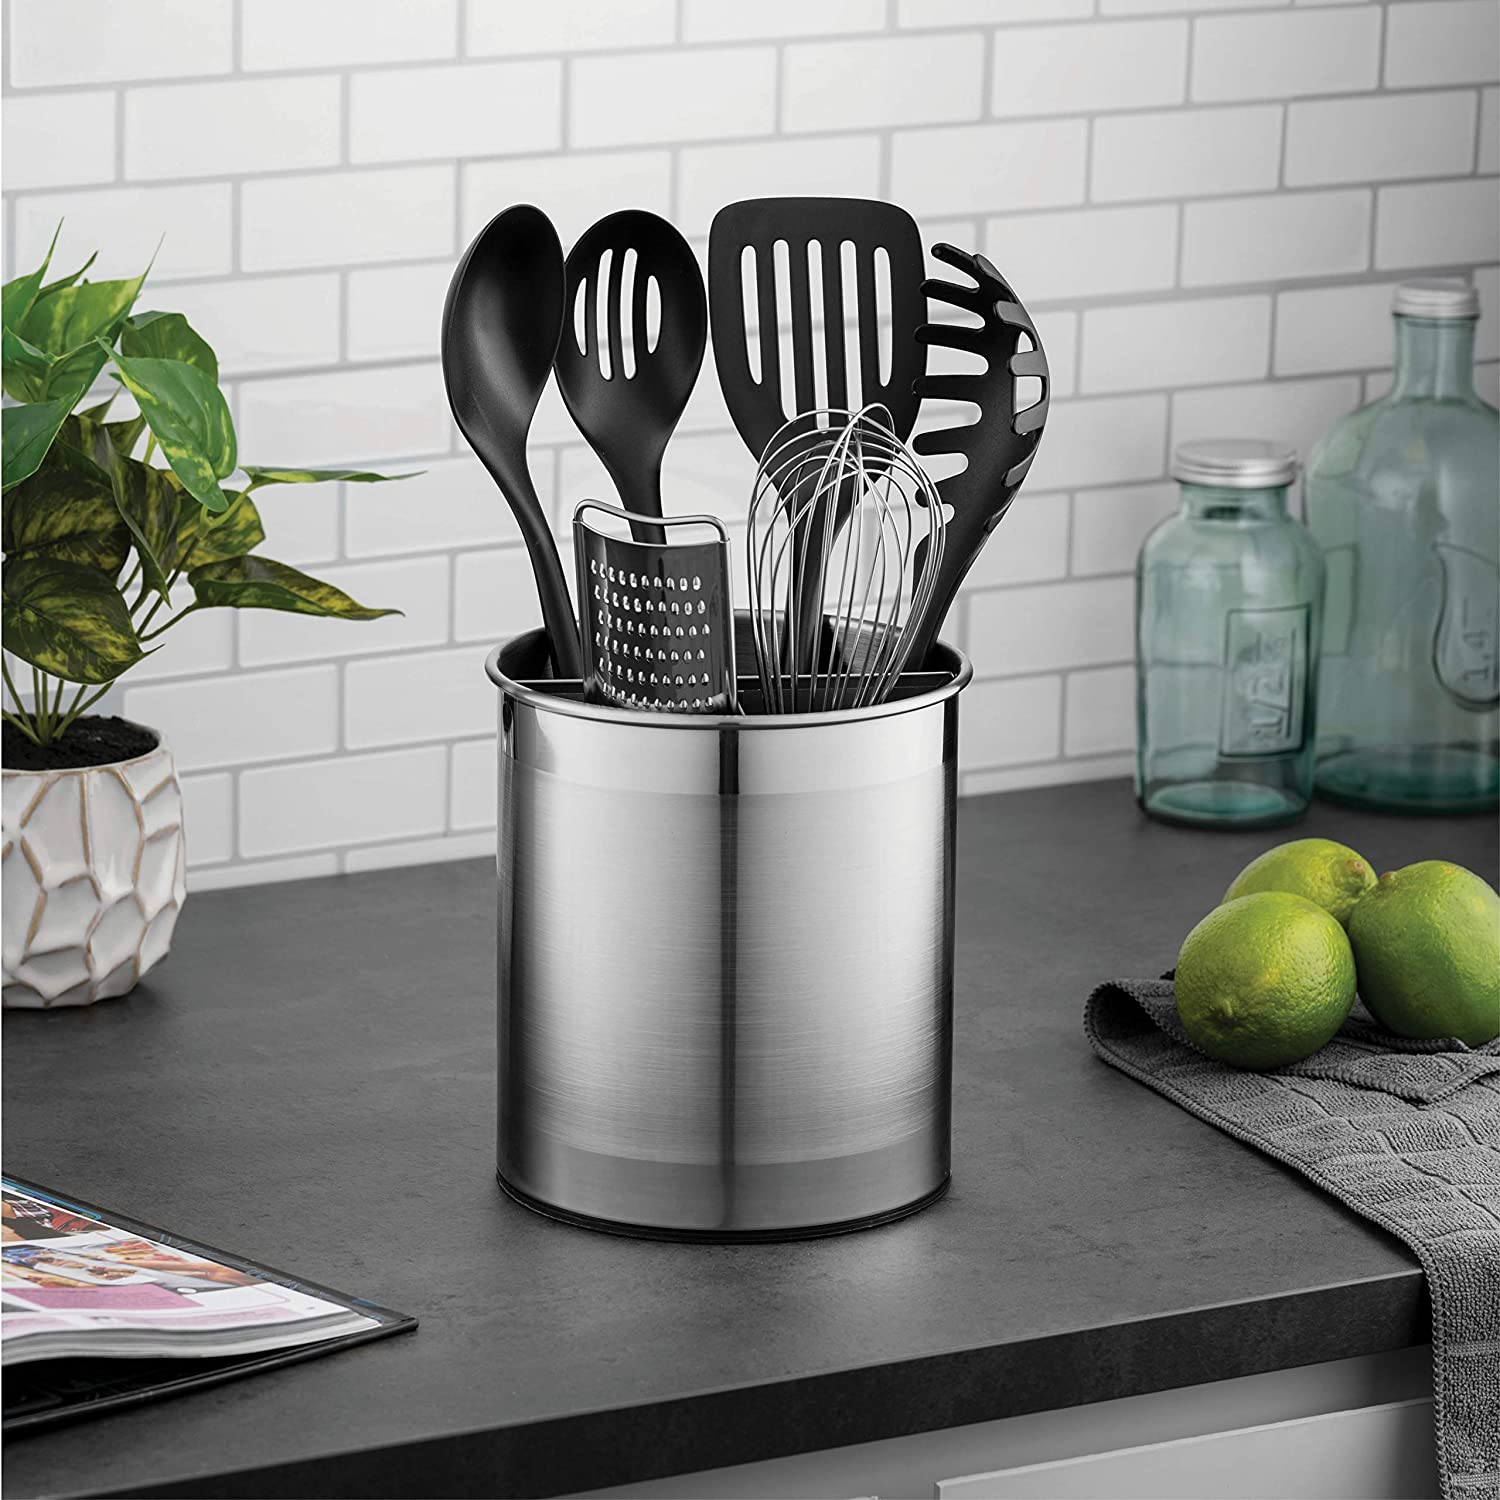 360° Rotating Stainless Steel Kitchen Utensils Holder Caddy with Removable Divider